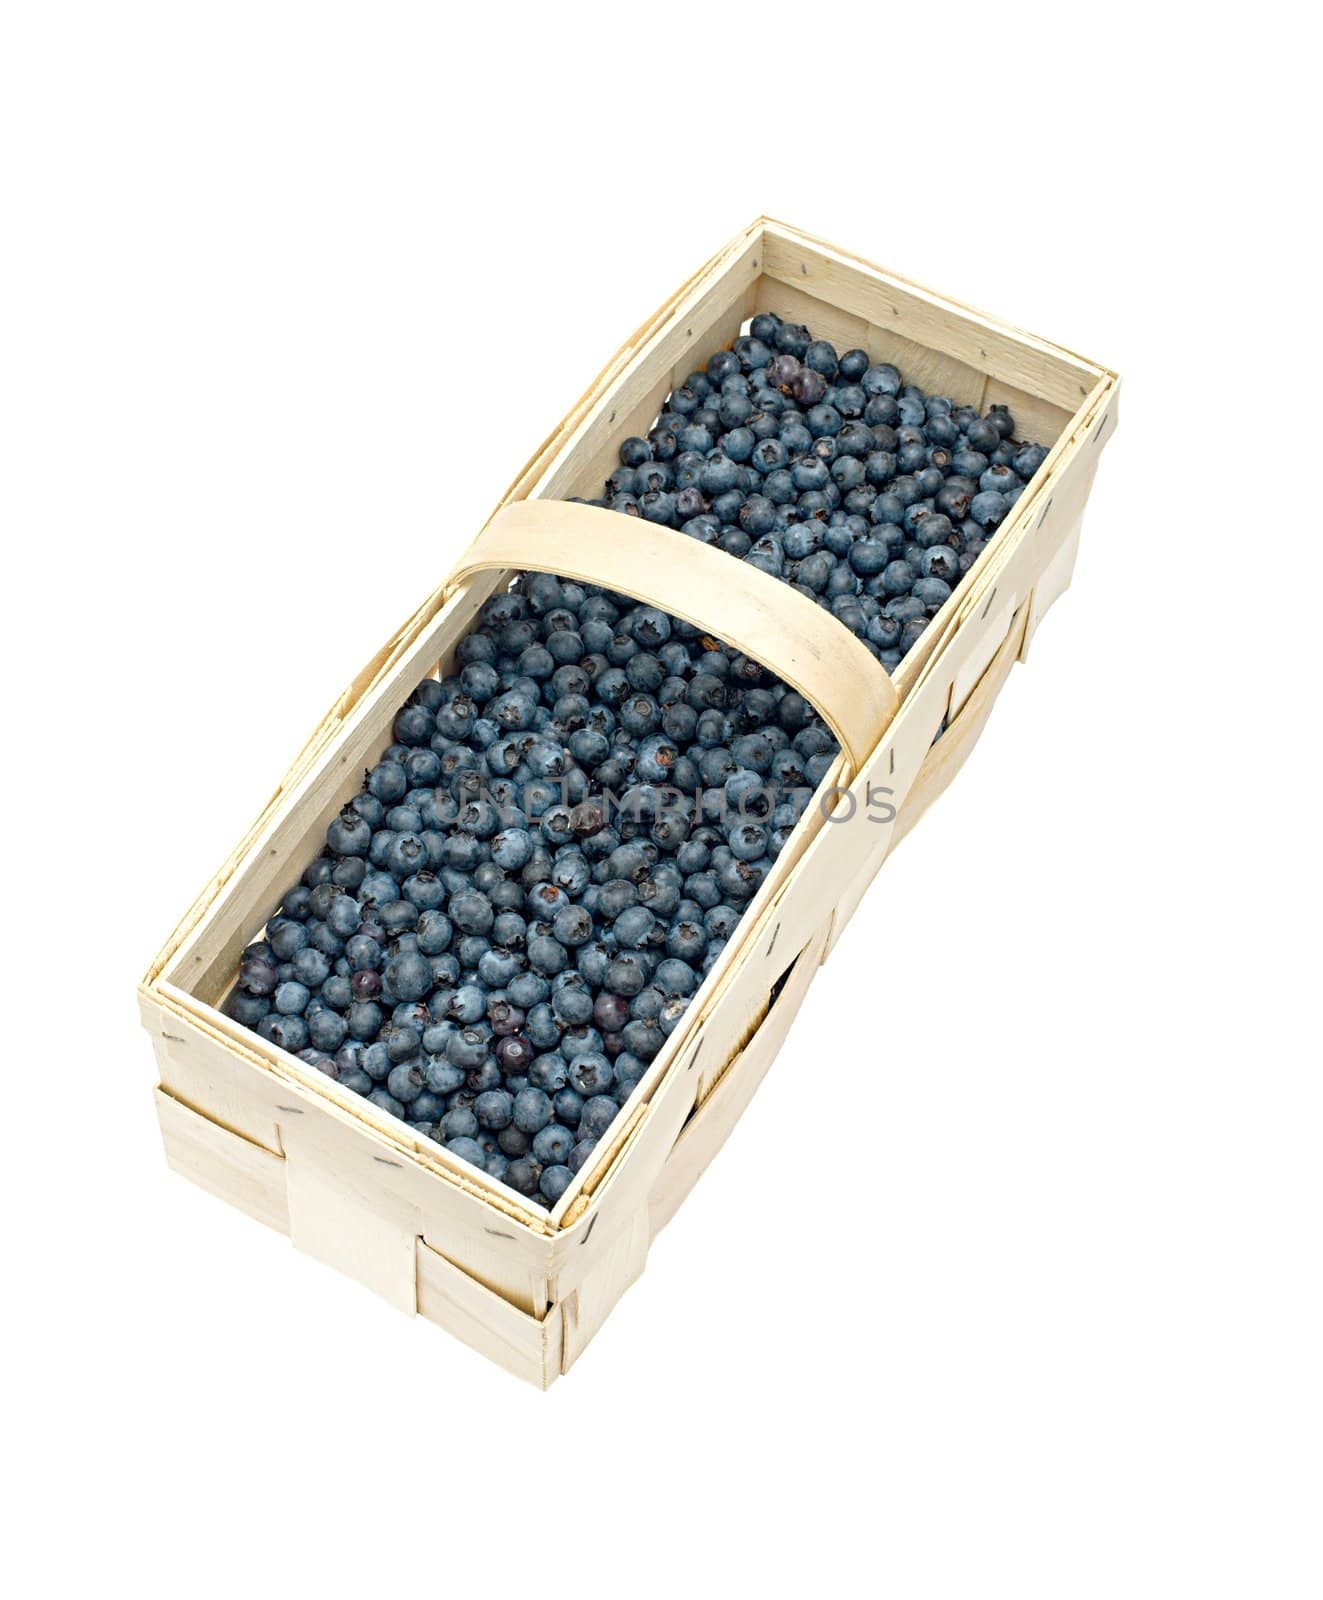 A basket of blueberries isolated on white